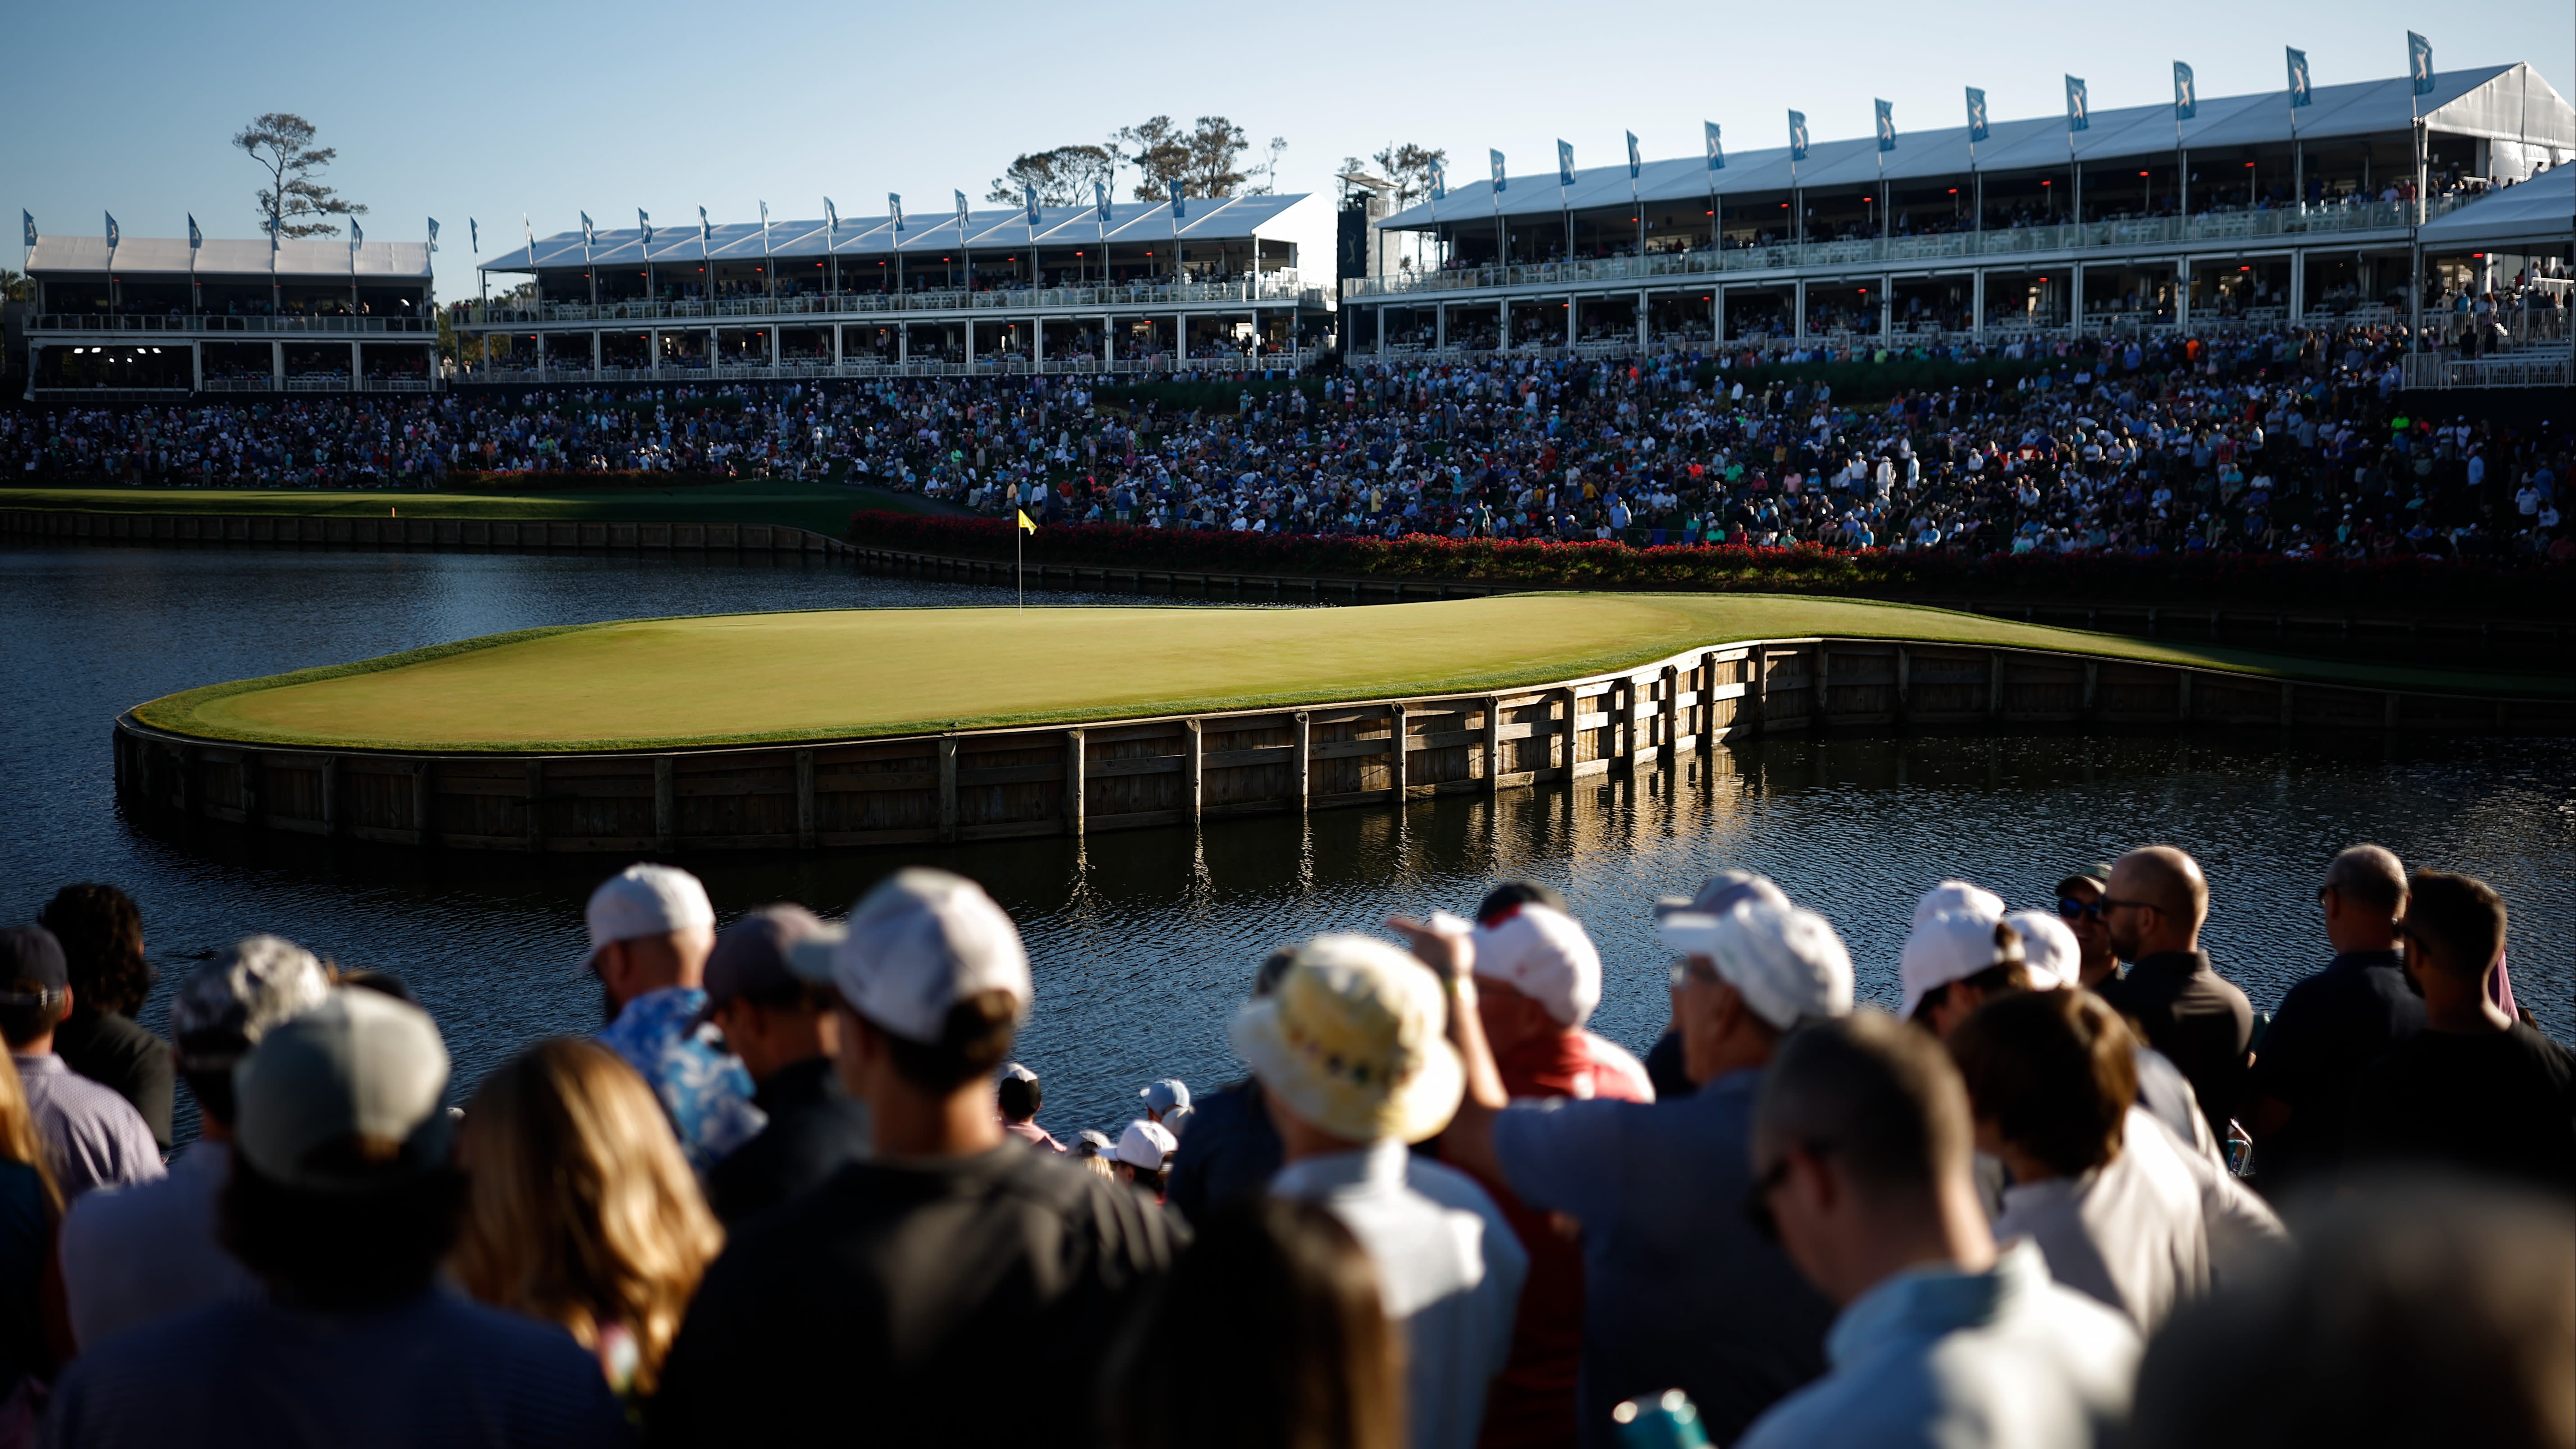 The 17th hole at TPC Sawgrass has seen some wild moments over the years. (Jared C. Tilton/Getty Images)